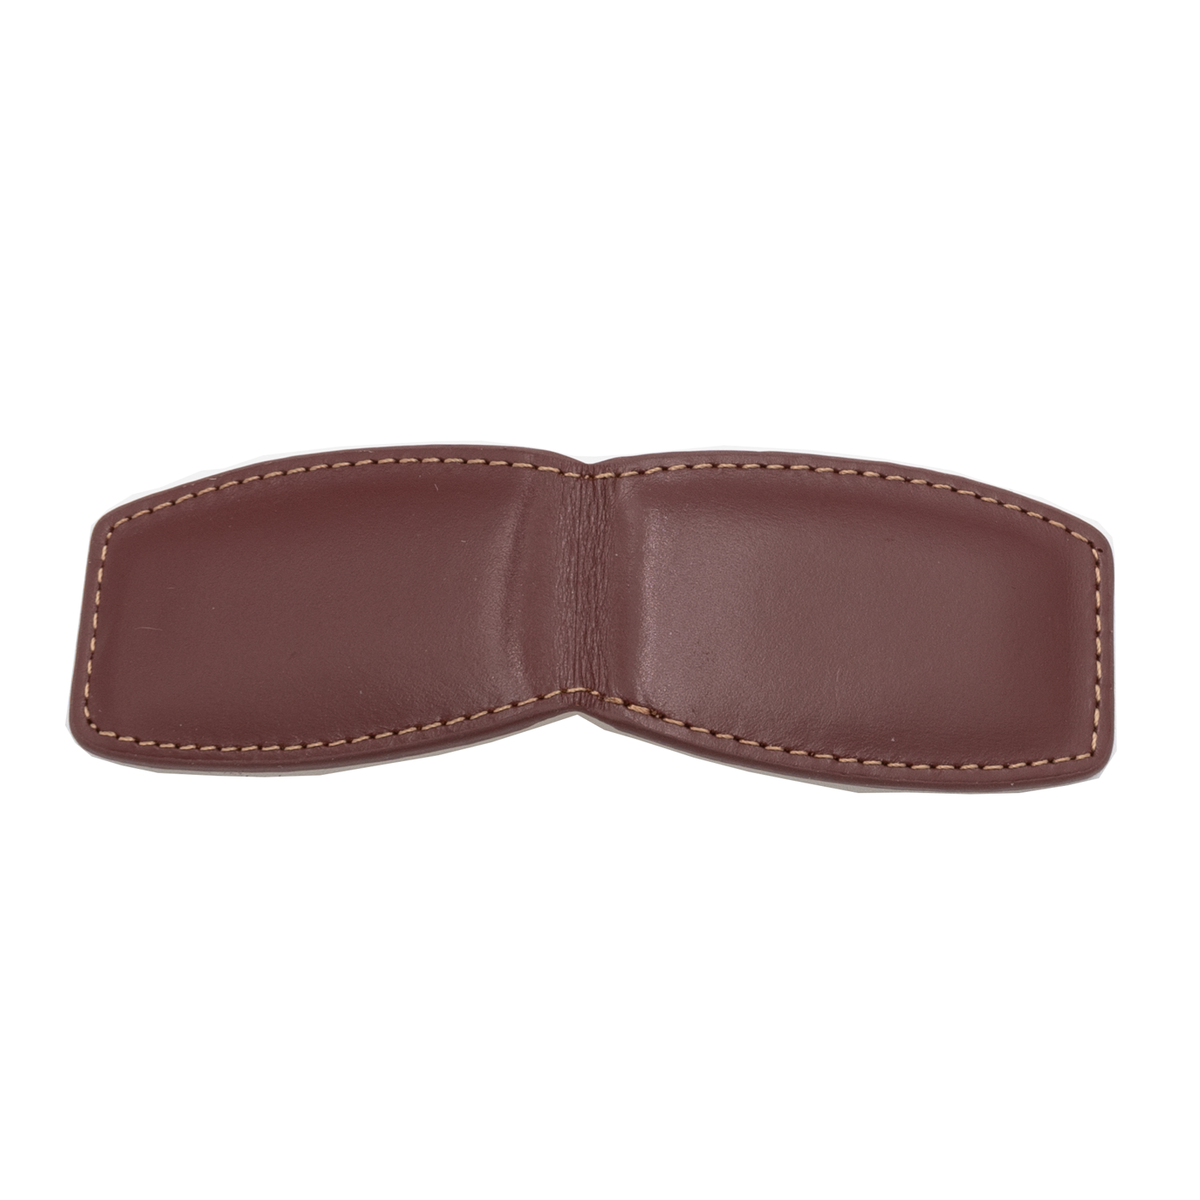 Brown Leather Moneyclip